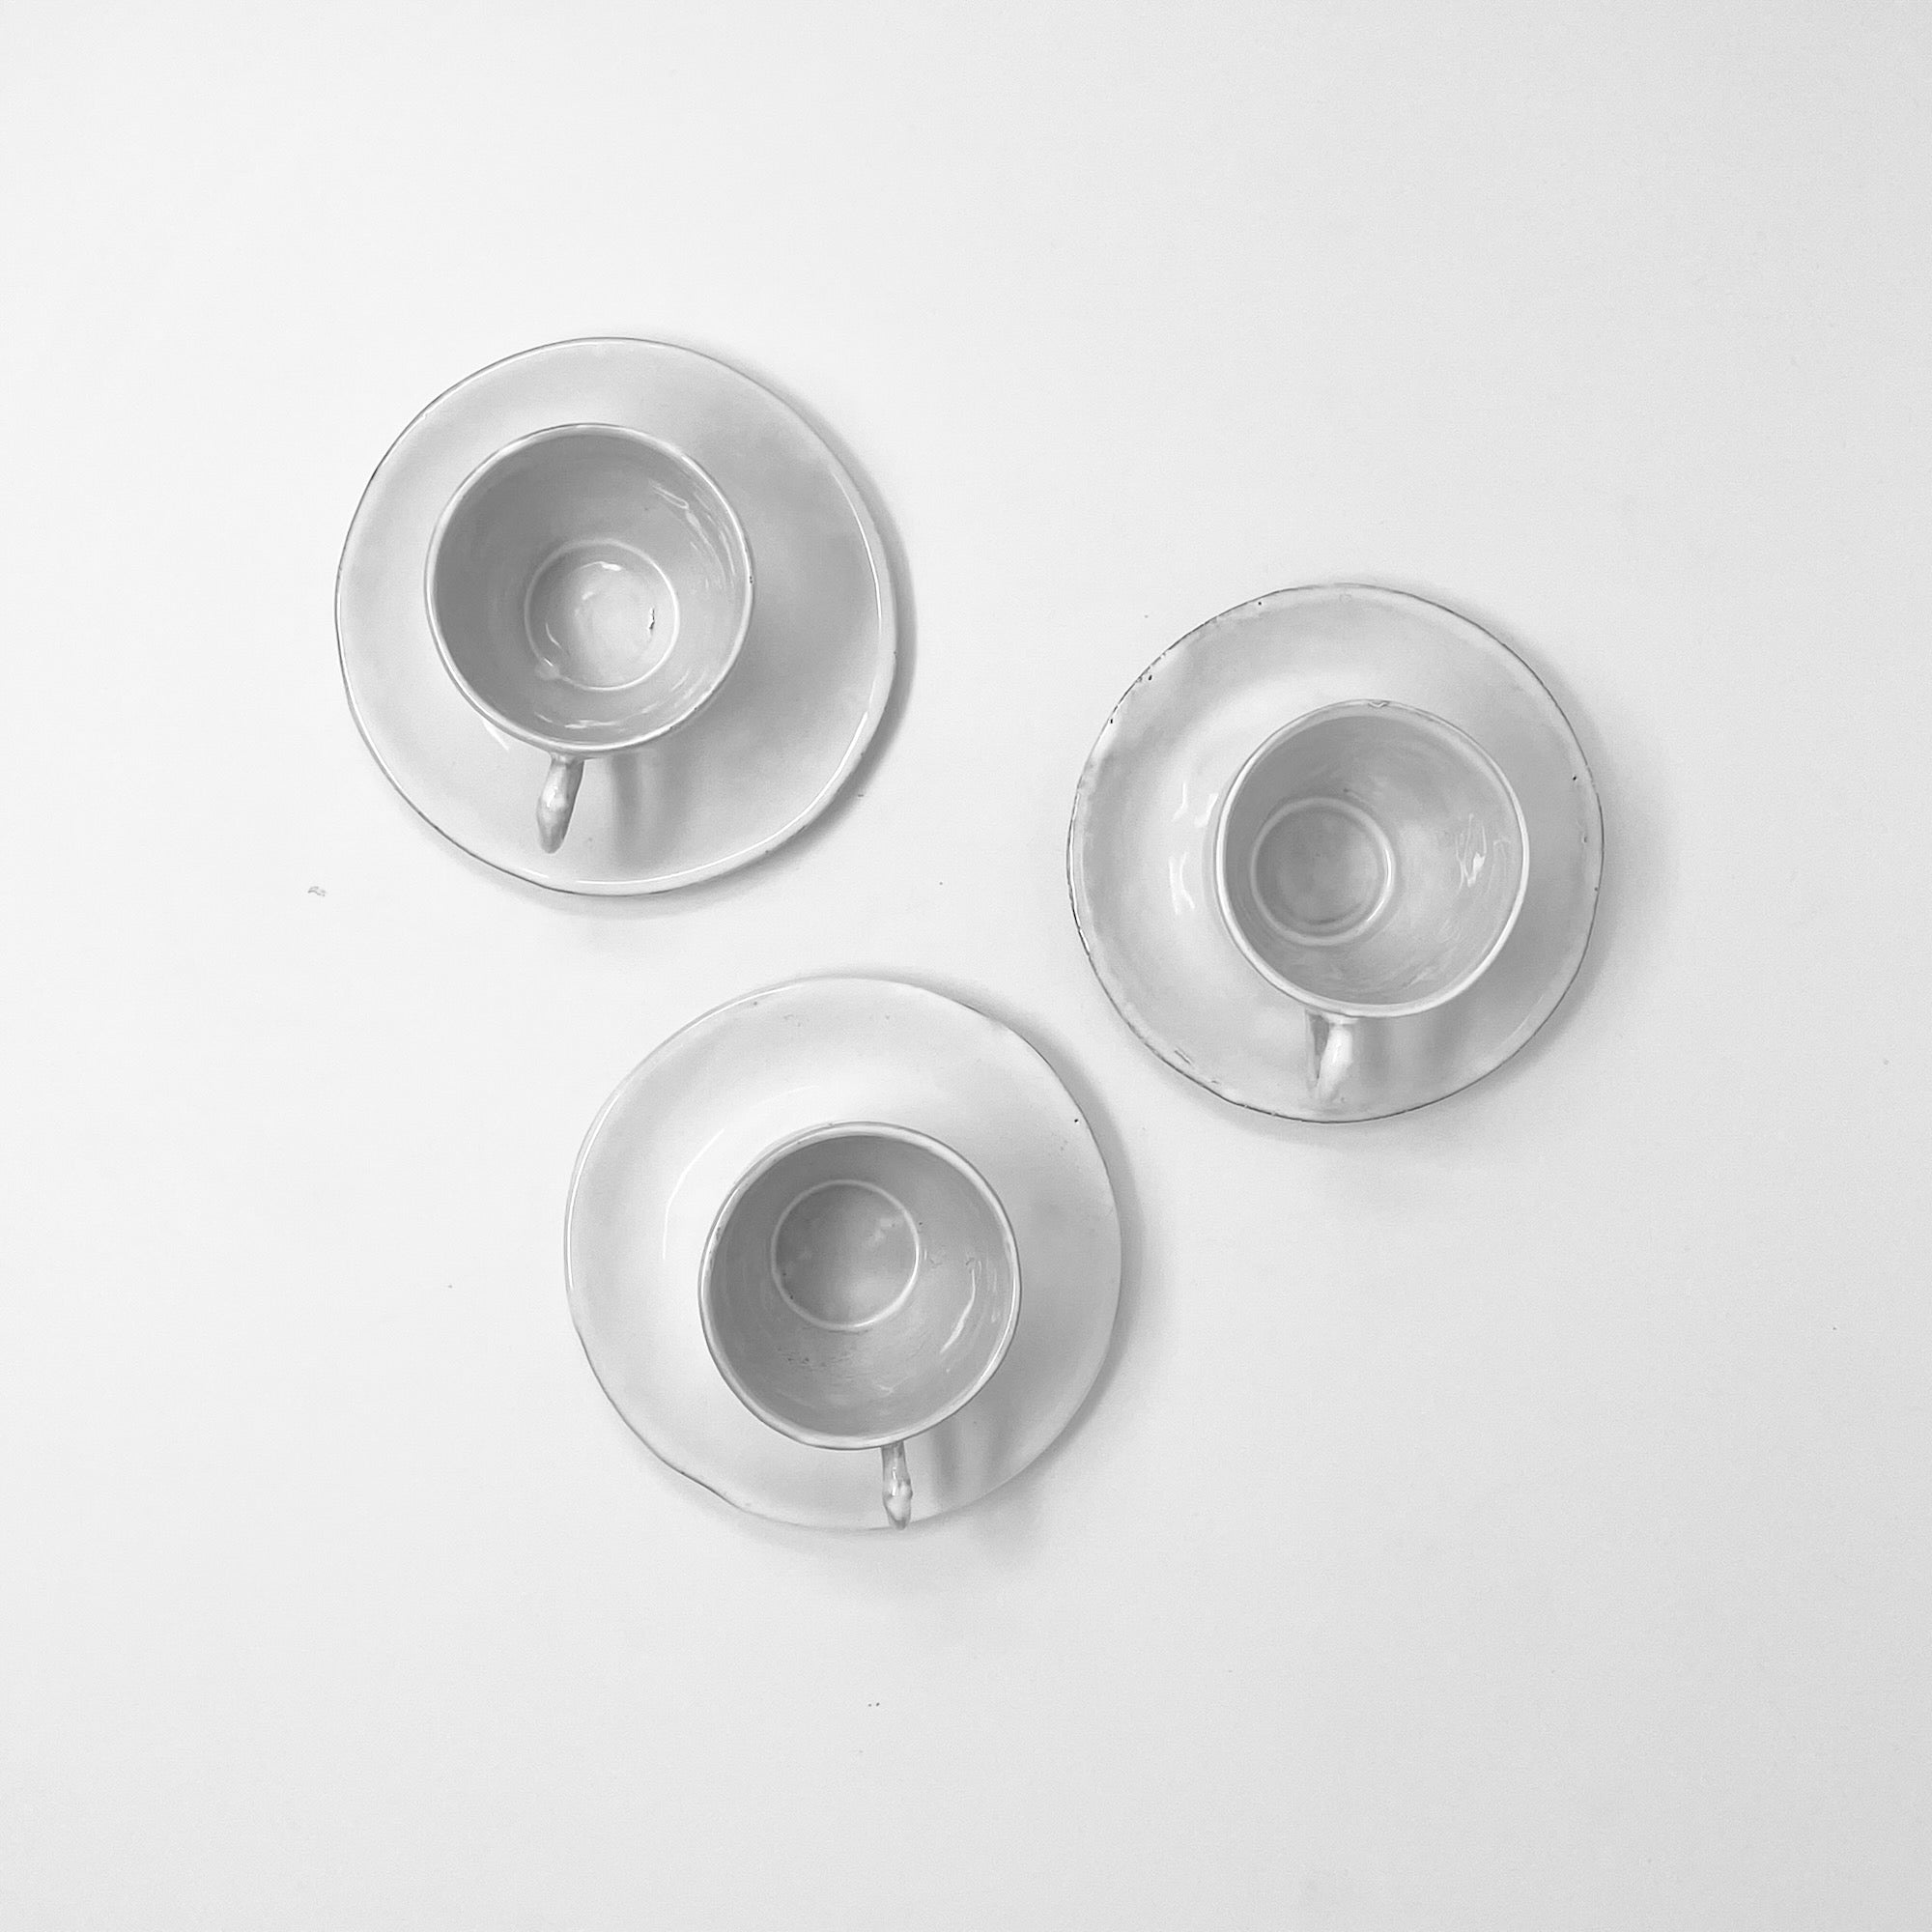 3x Cups and saucers set